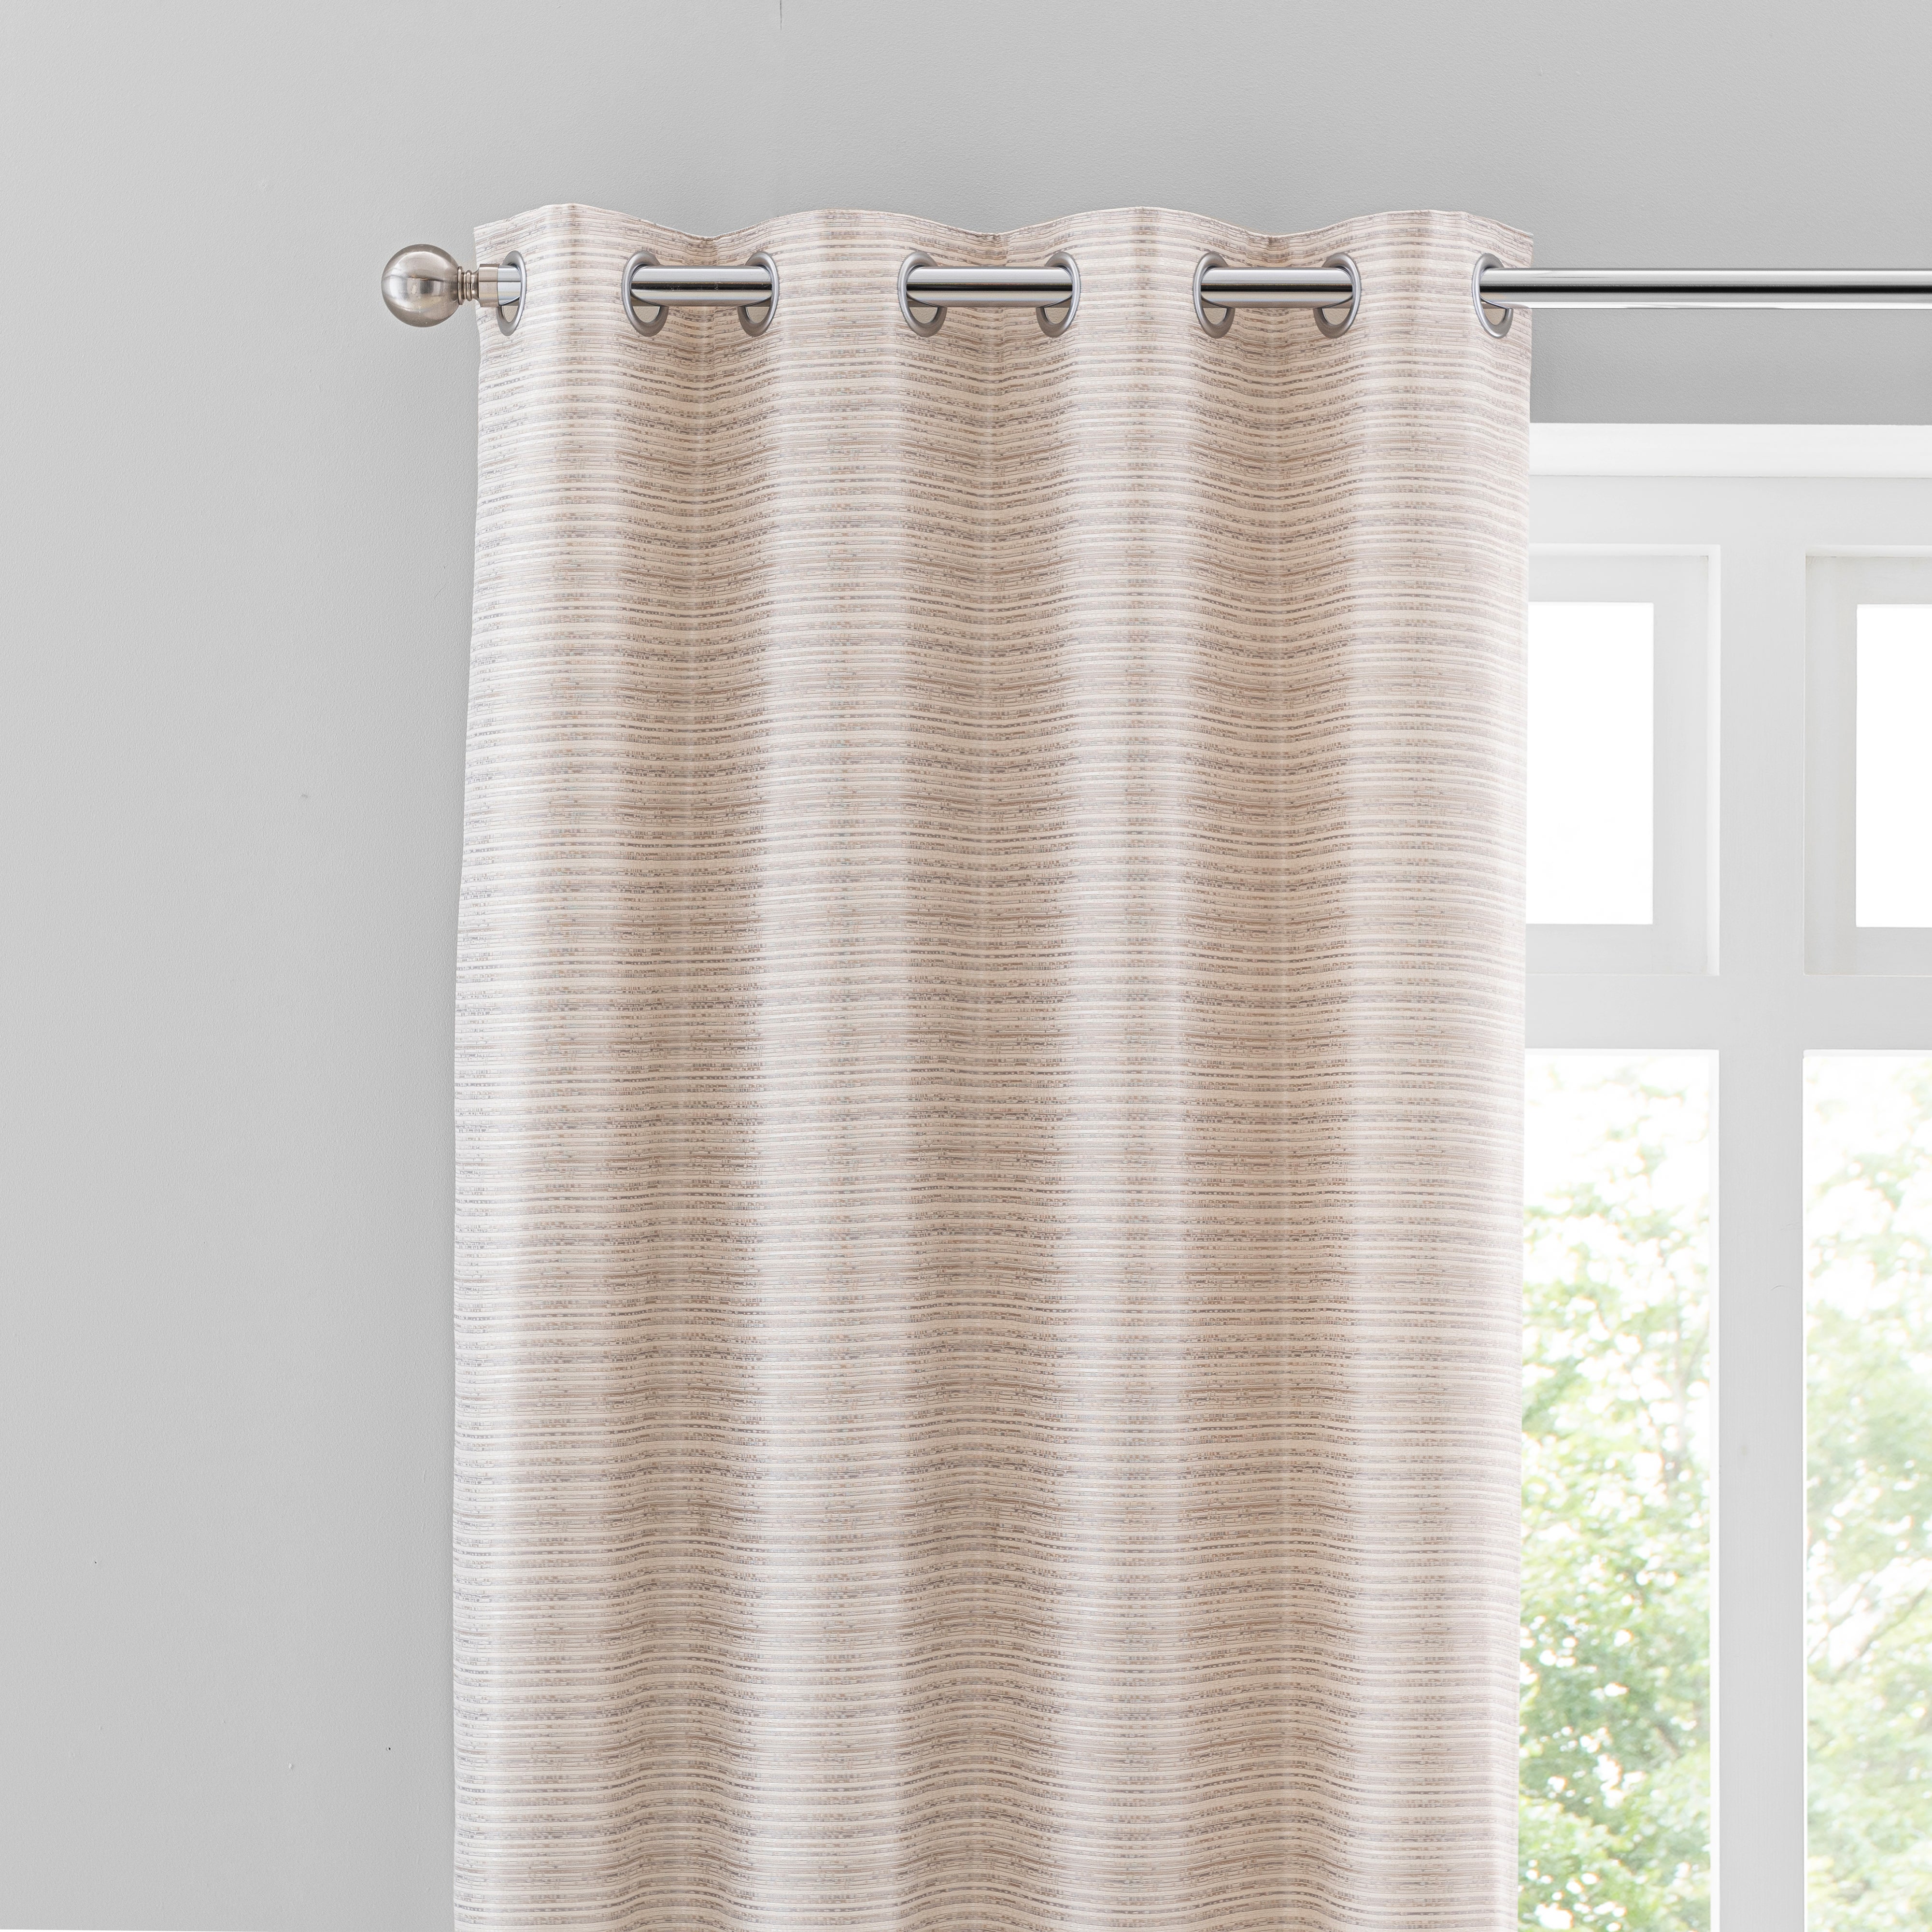 How To Measure For Eyelet Curtains Dunelm | www.cintronbeveragegroup.com